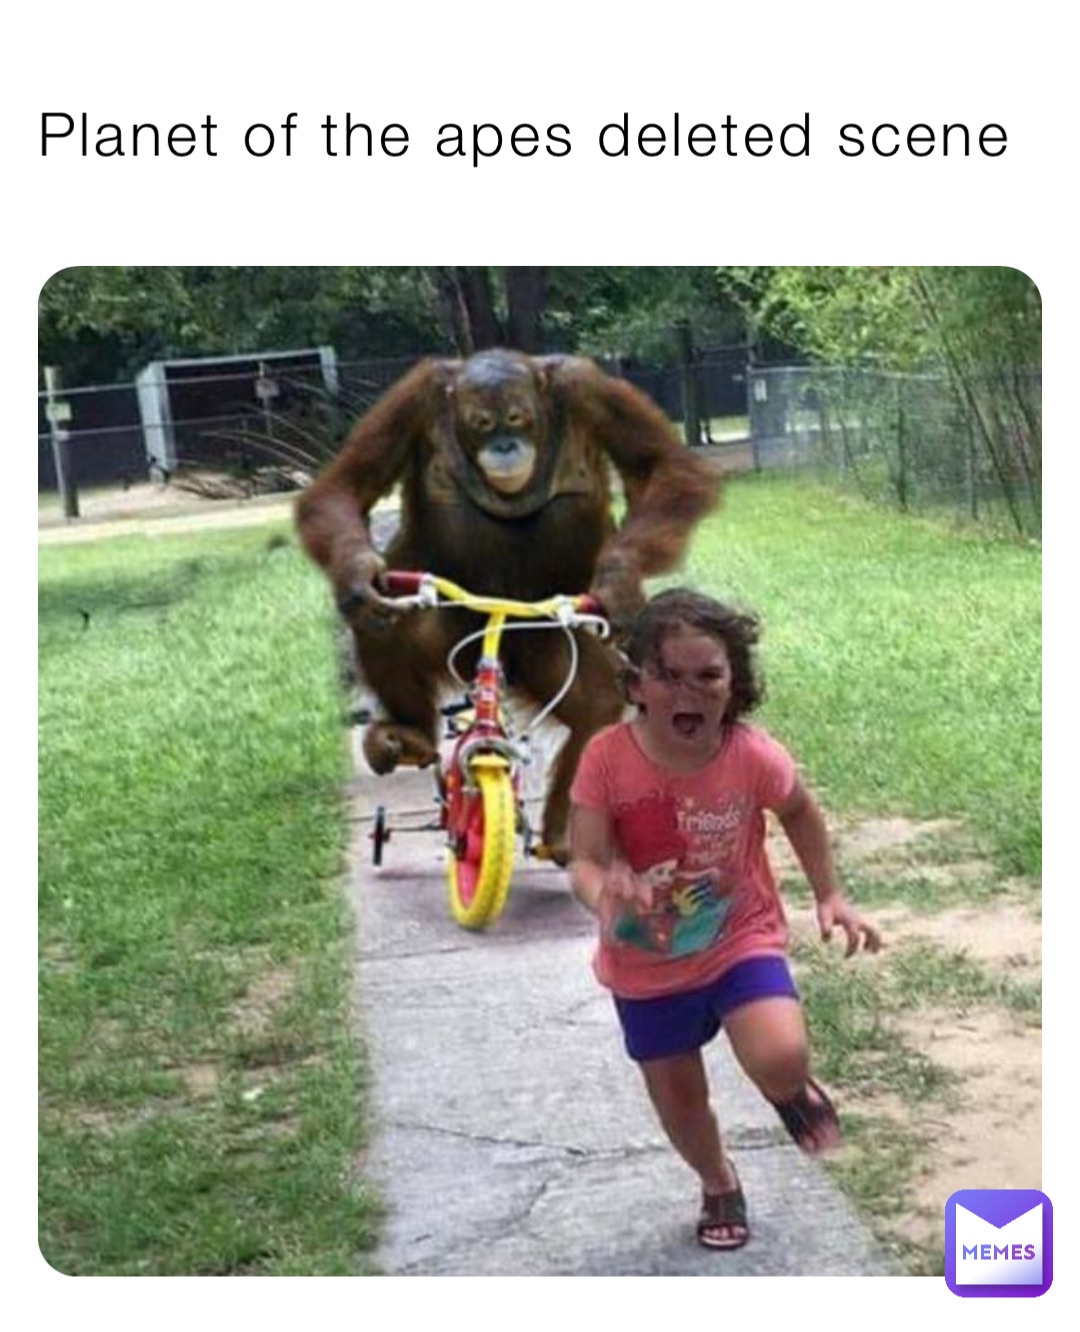 Planet of the apes deleted scene